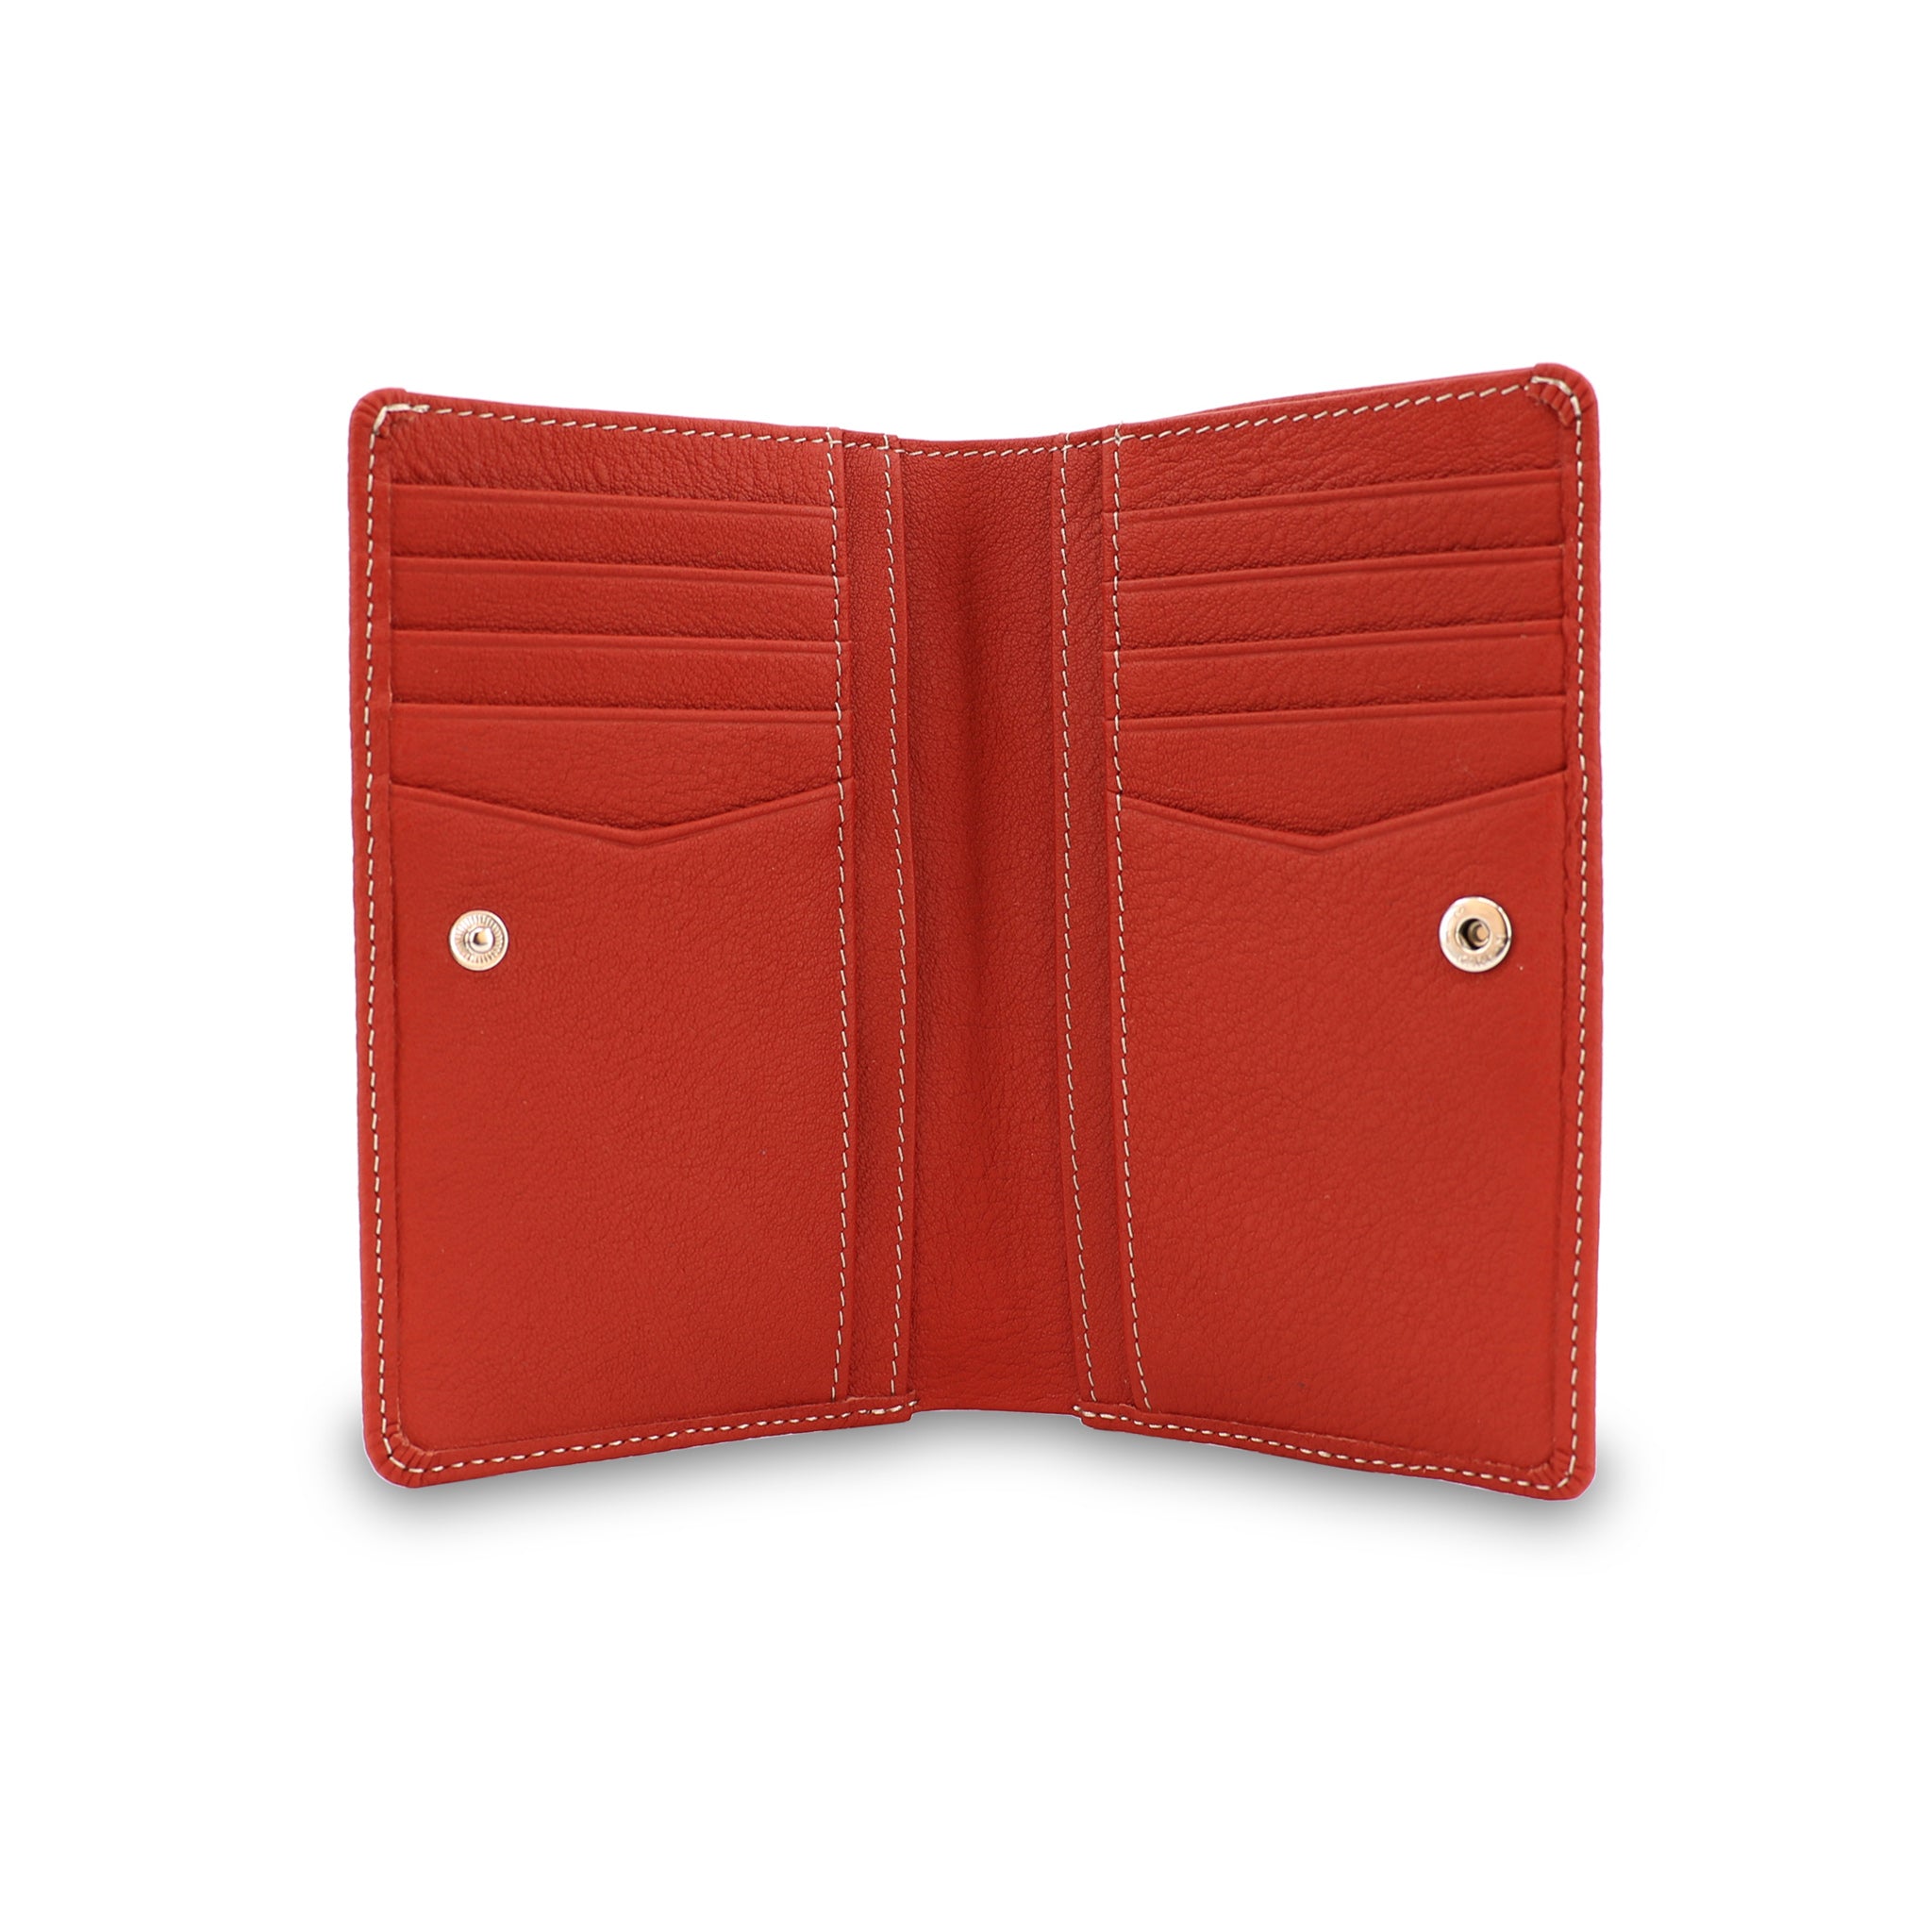 Mid-size wallet